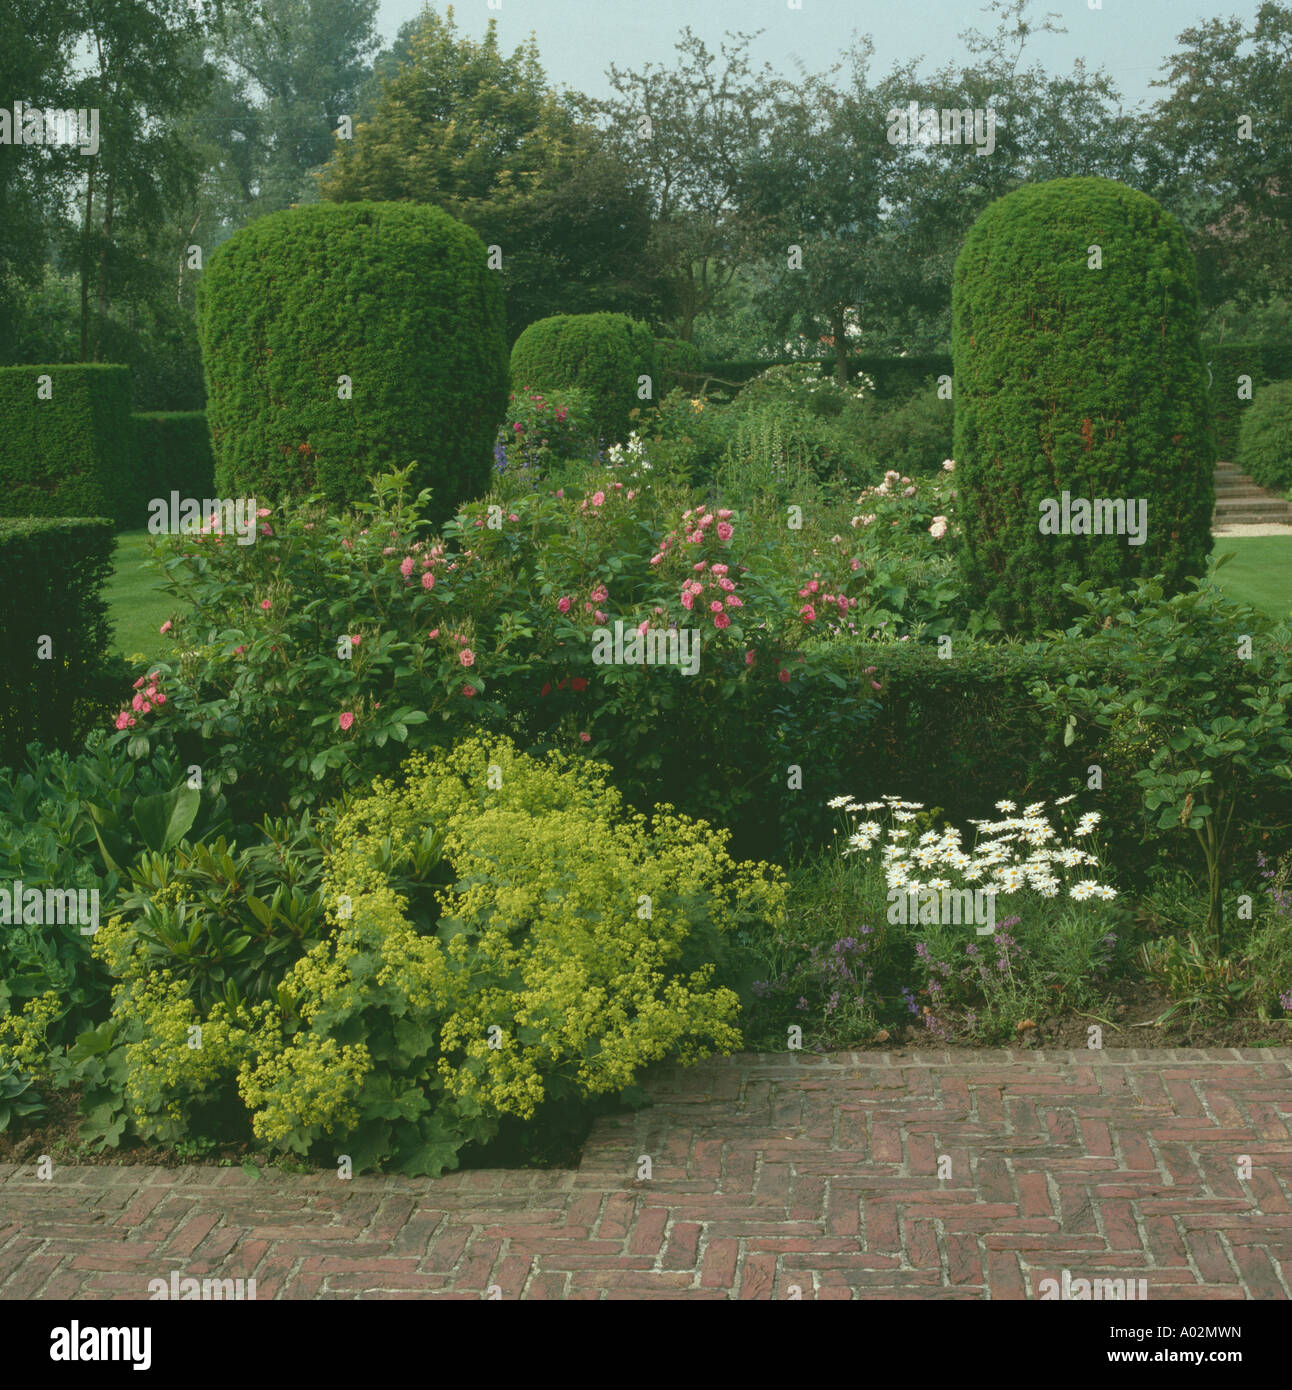 Corner of a large country garden with lady s mantle roses and clipped yew pillars Stock Photo